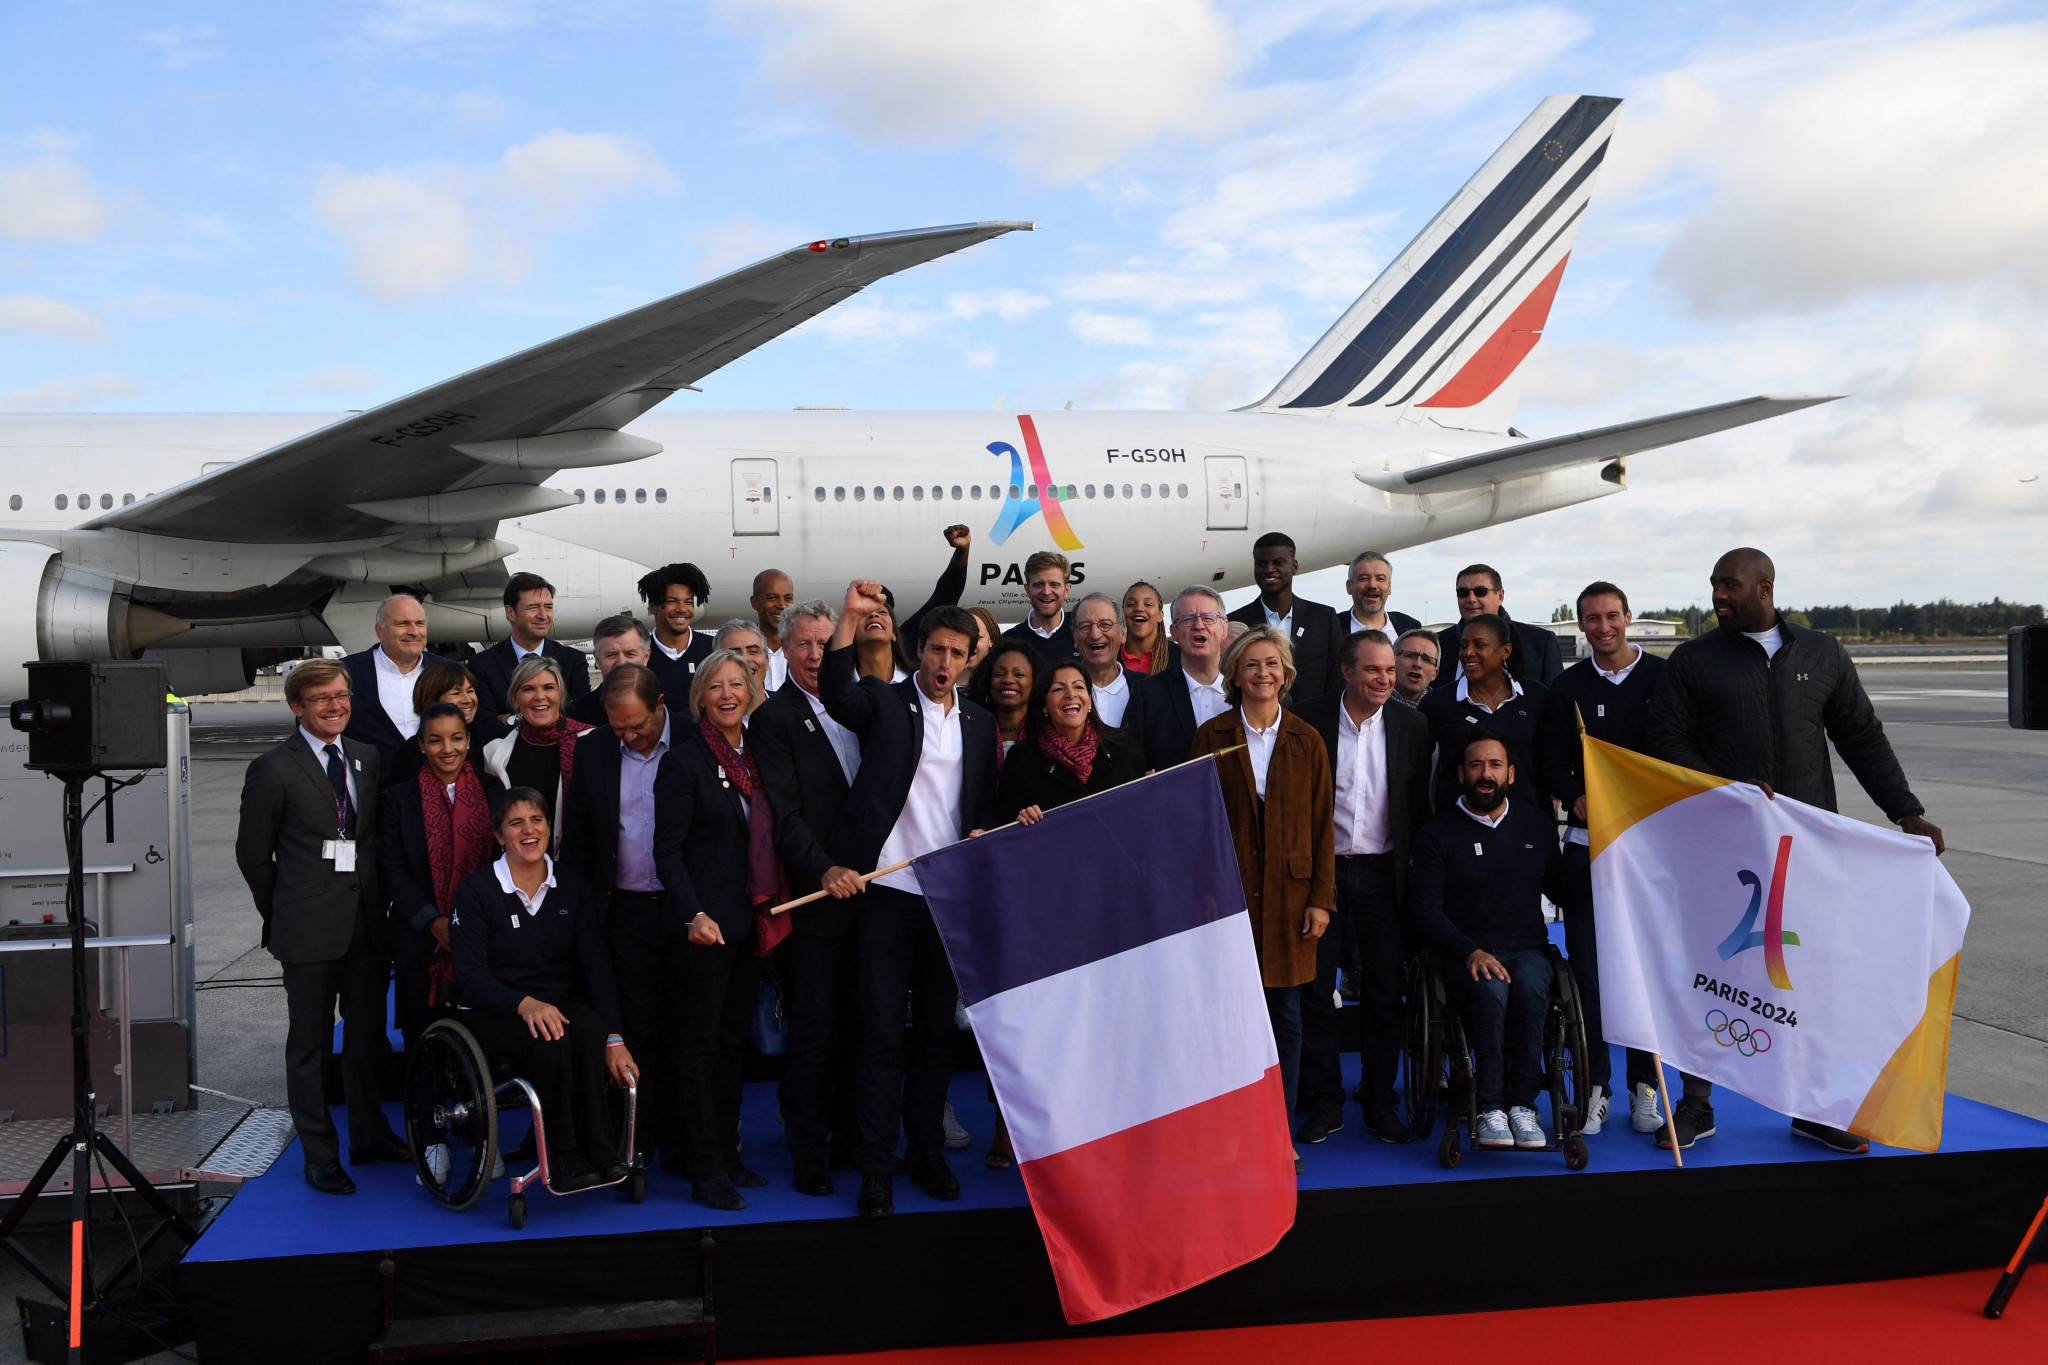 The Paris 2024 bid logo was emblazoned on Air France's planes in a show of support to bring the Olympic Games to back to the capital for the first time in a century ©Getty Images